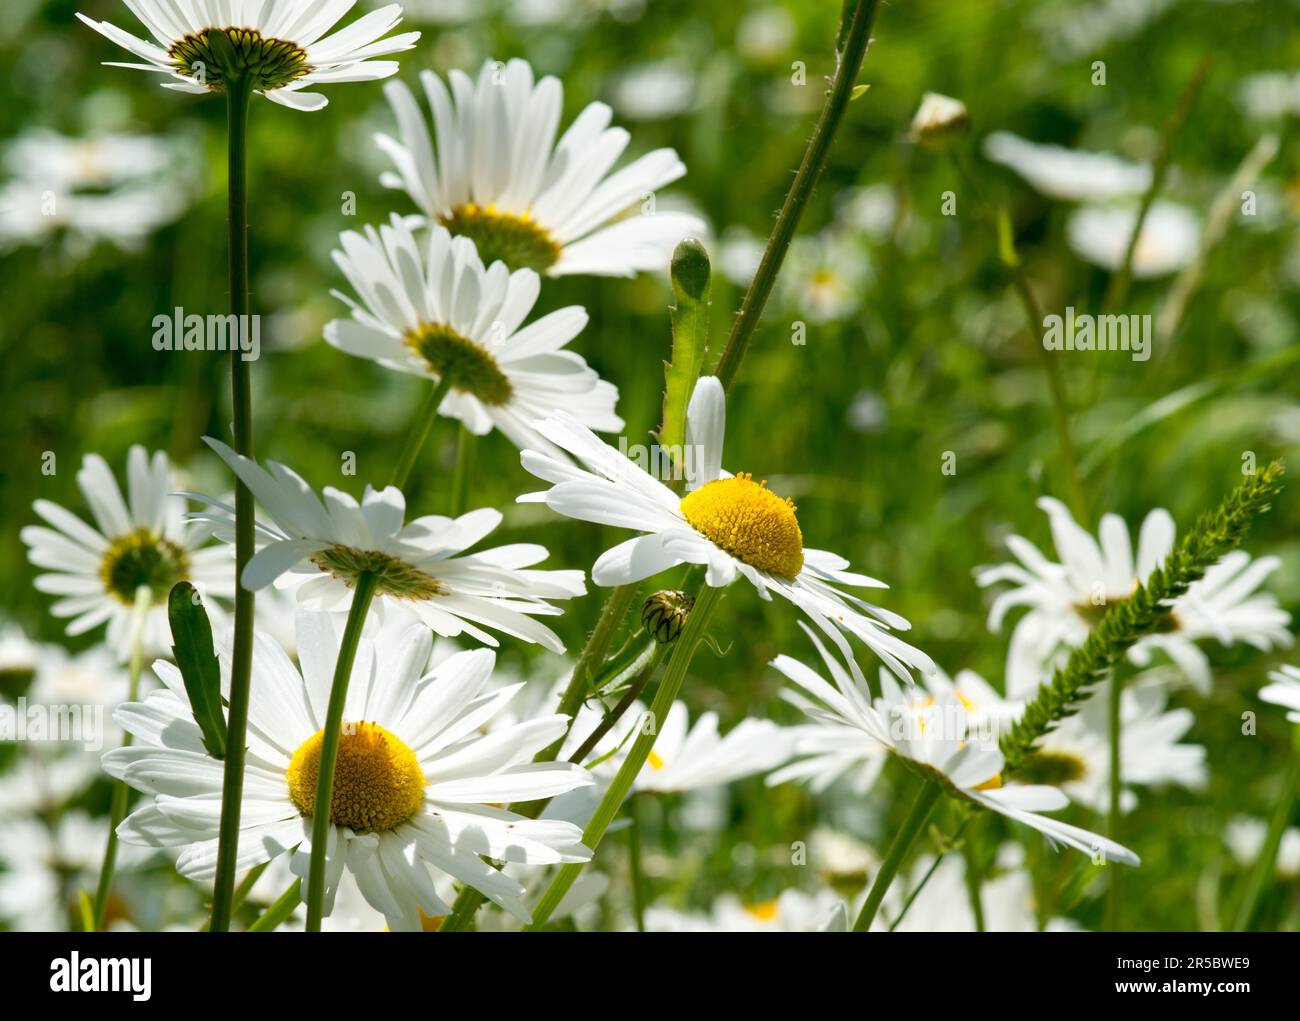 Bellis perennis or Common Daisy ,it is sometimes qualified as common daisy, lawn daisy or English daisy. Stock Photo